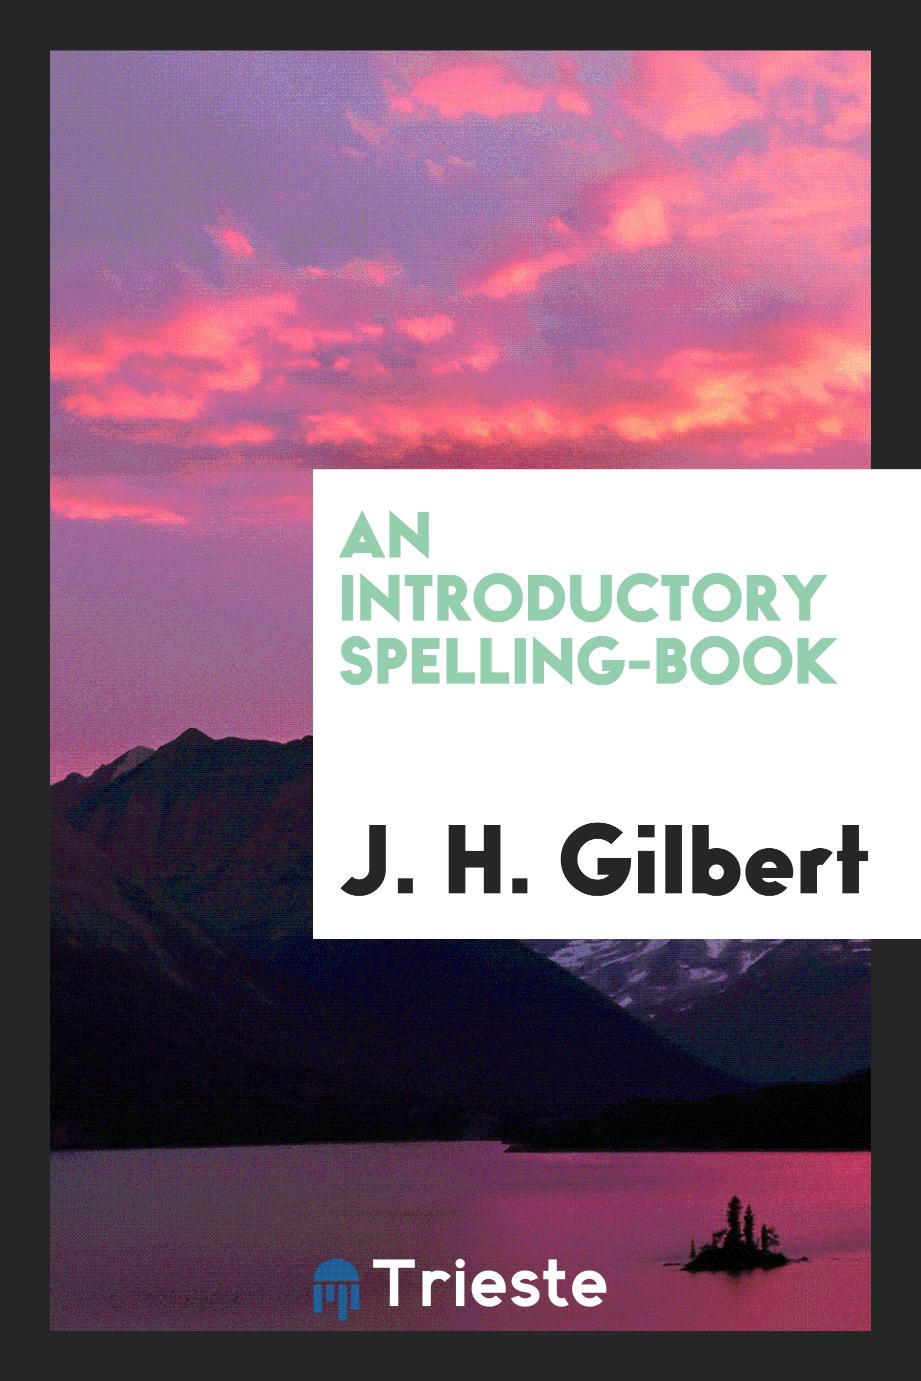 An Introductory Spelling-Book